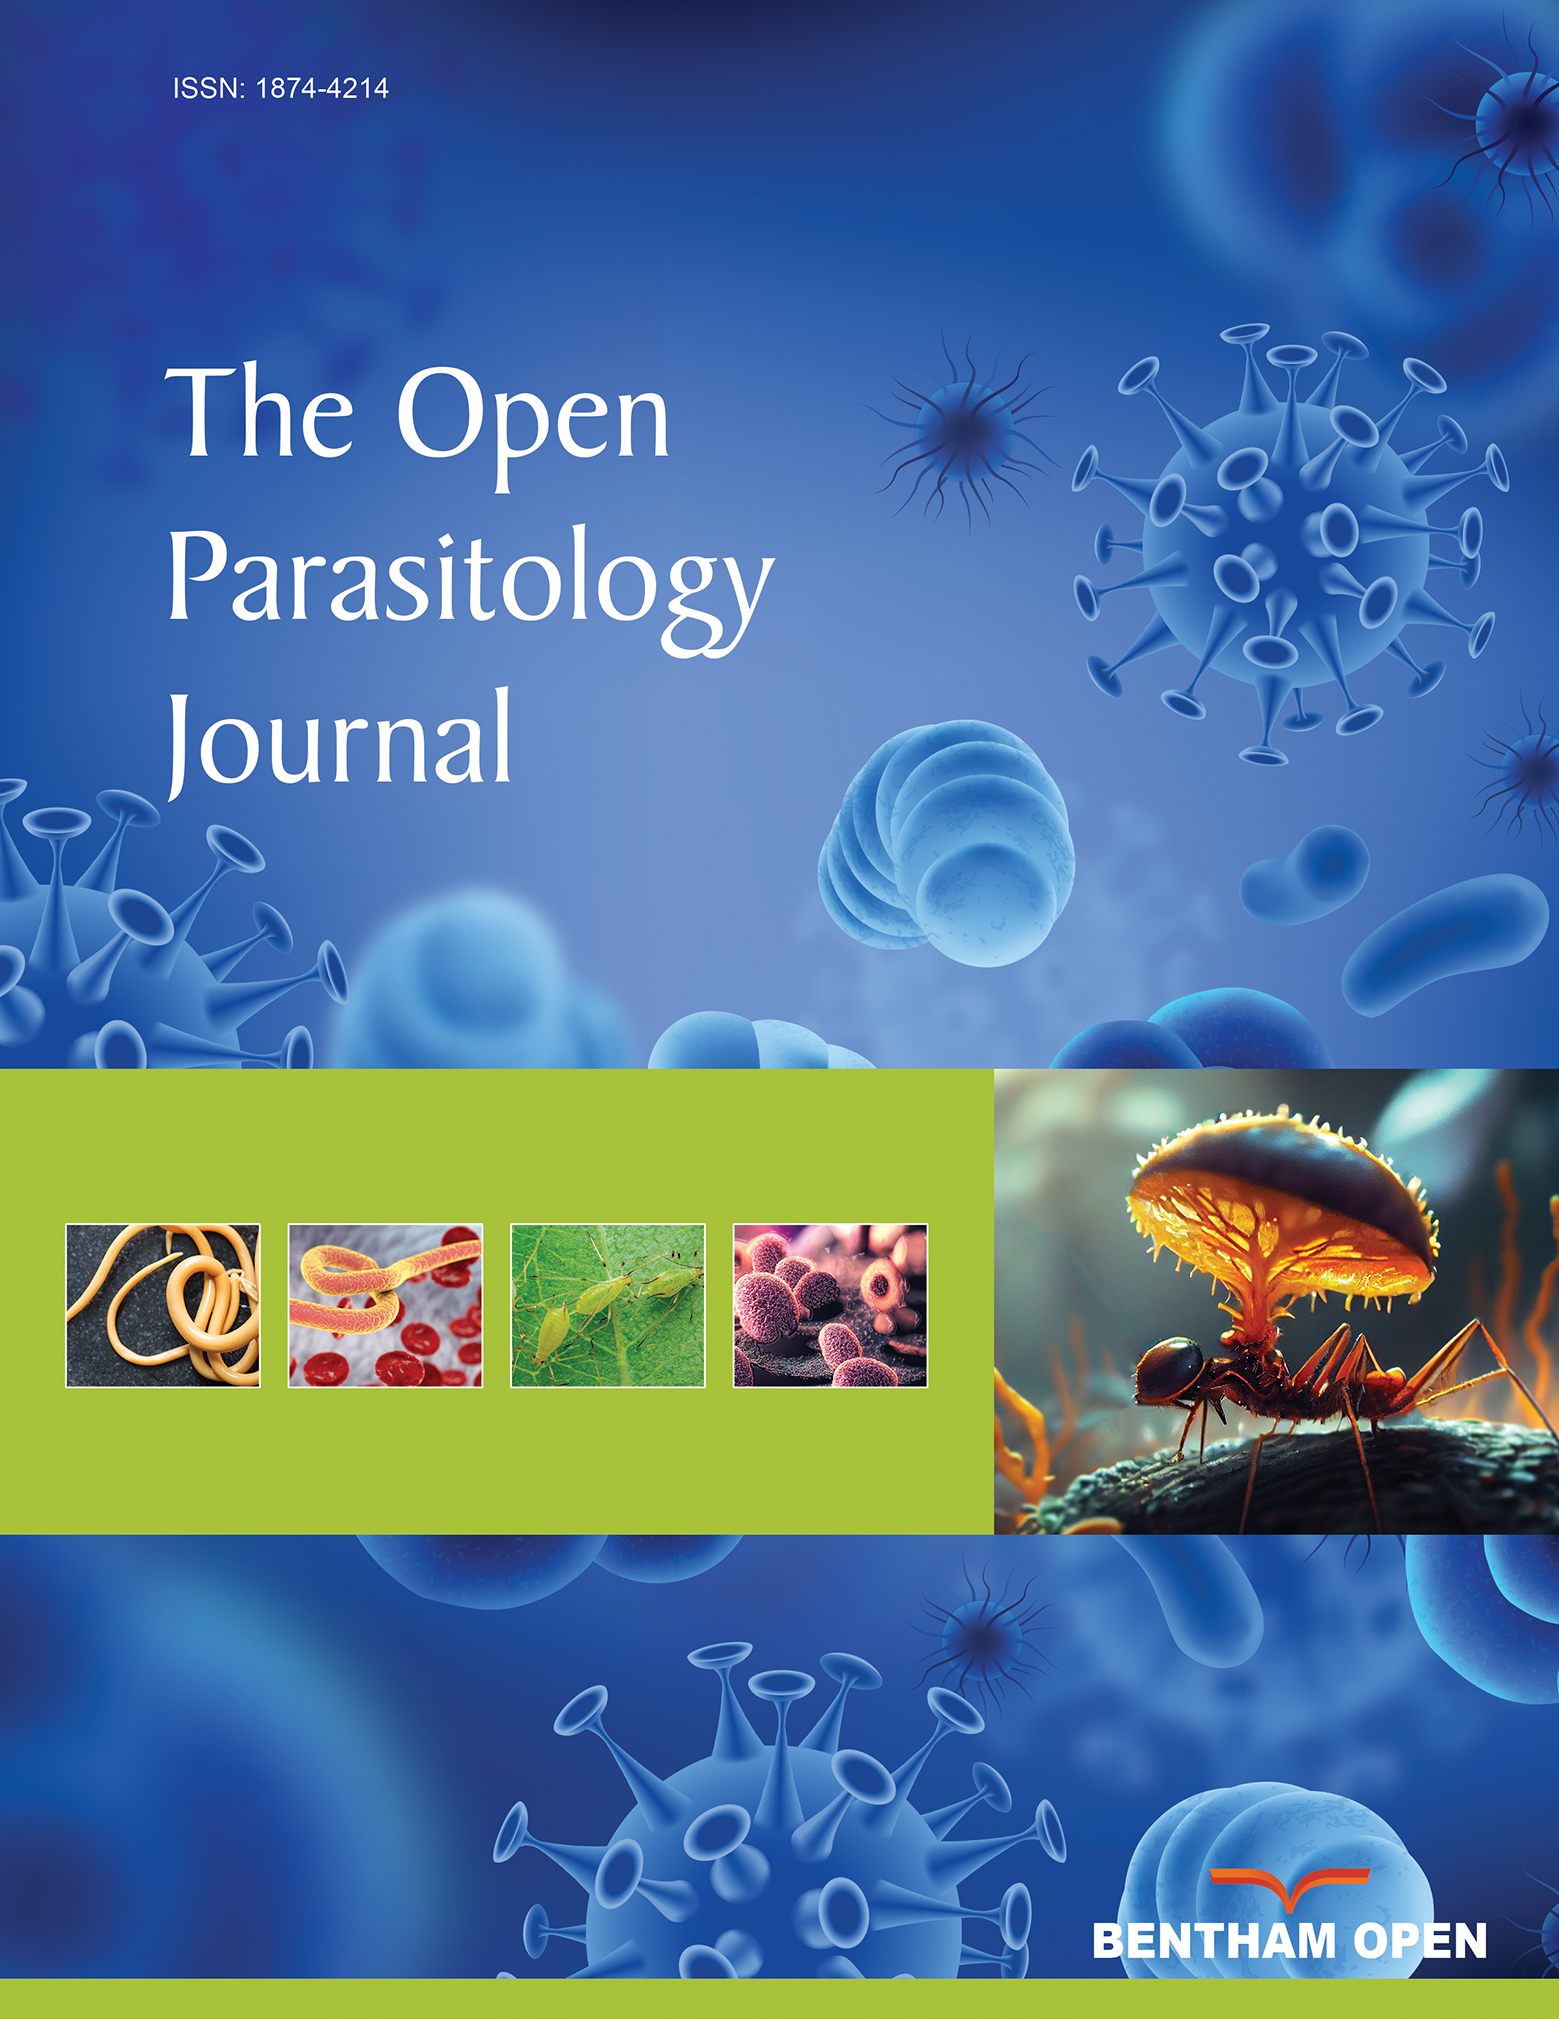 The Open Parasitology Journal